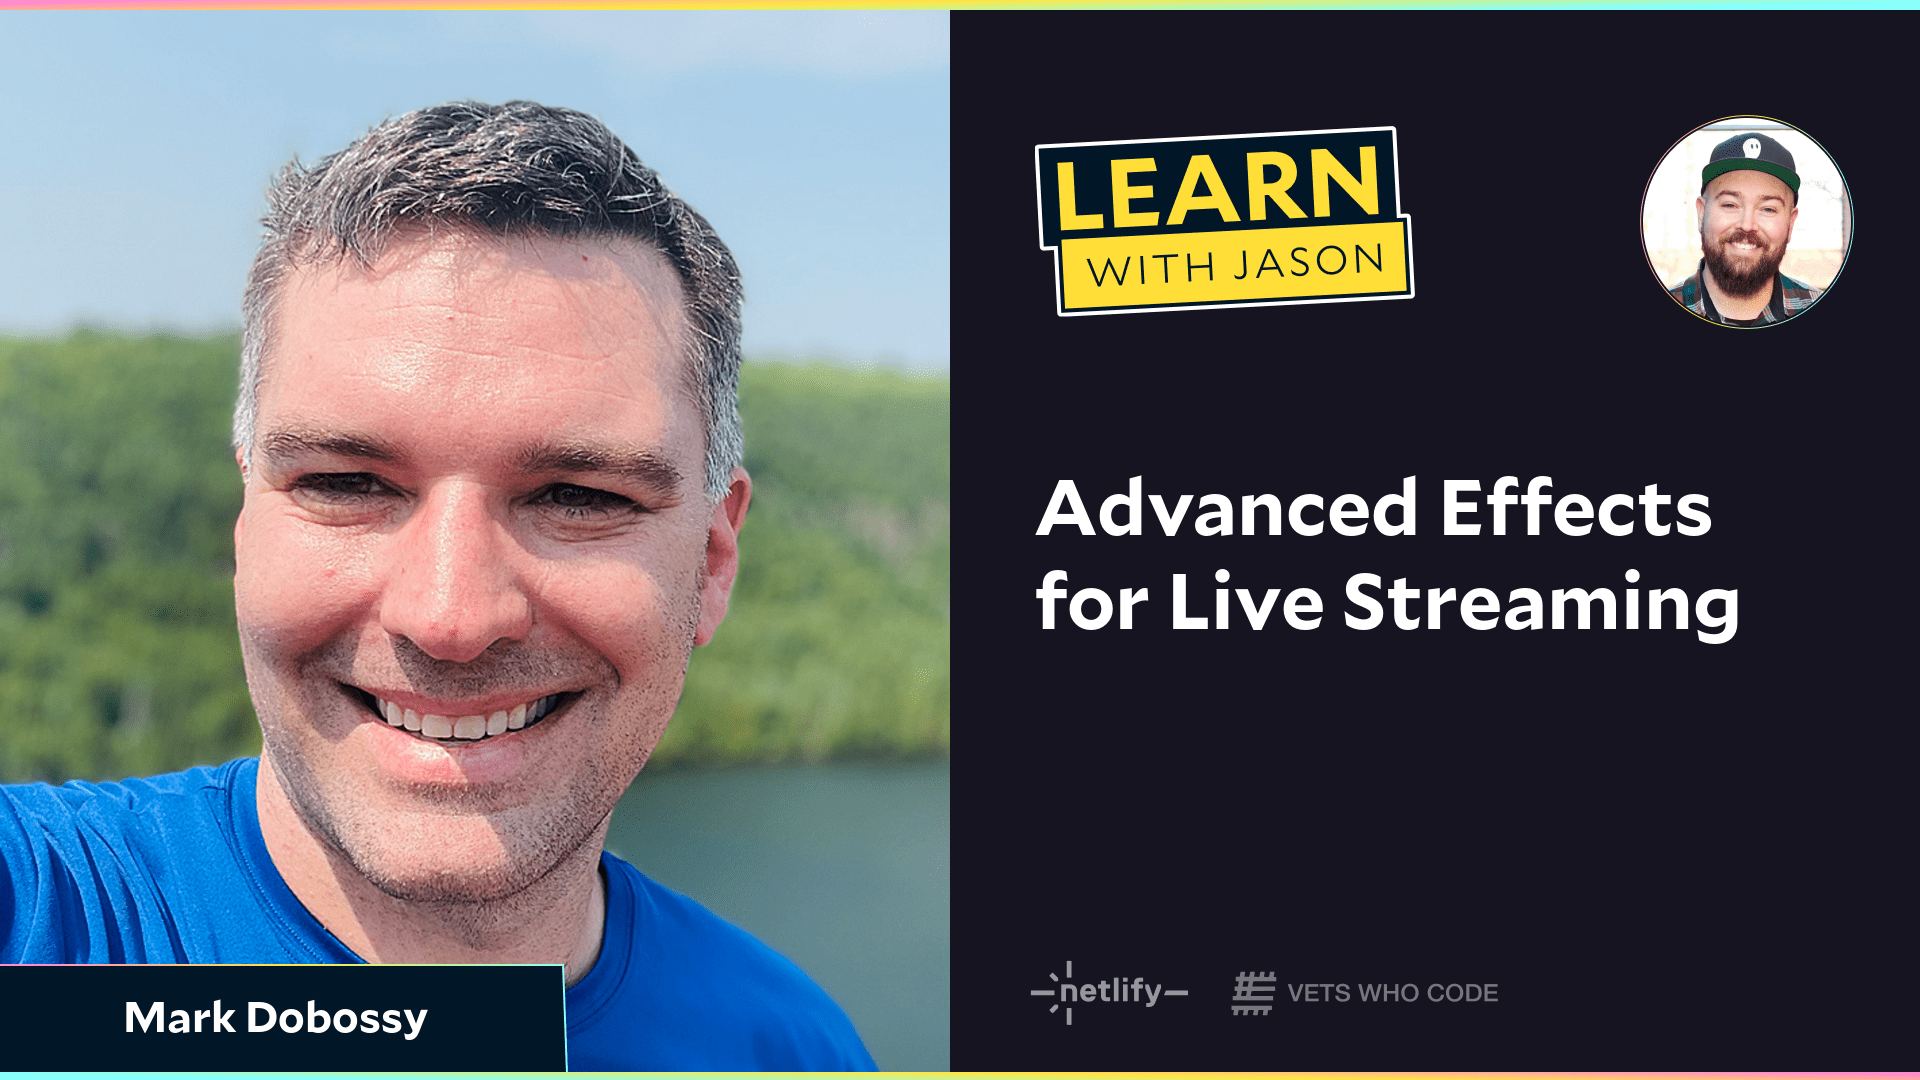 Advanced Effects for Live Streaming (with Mark Dobossy)